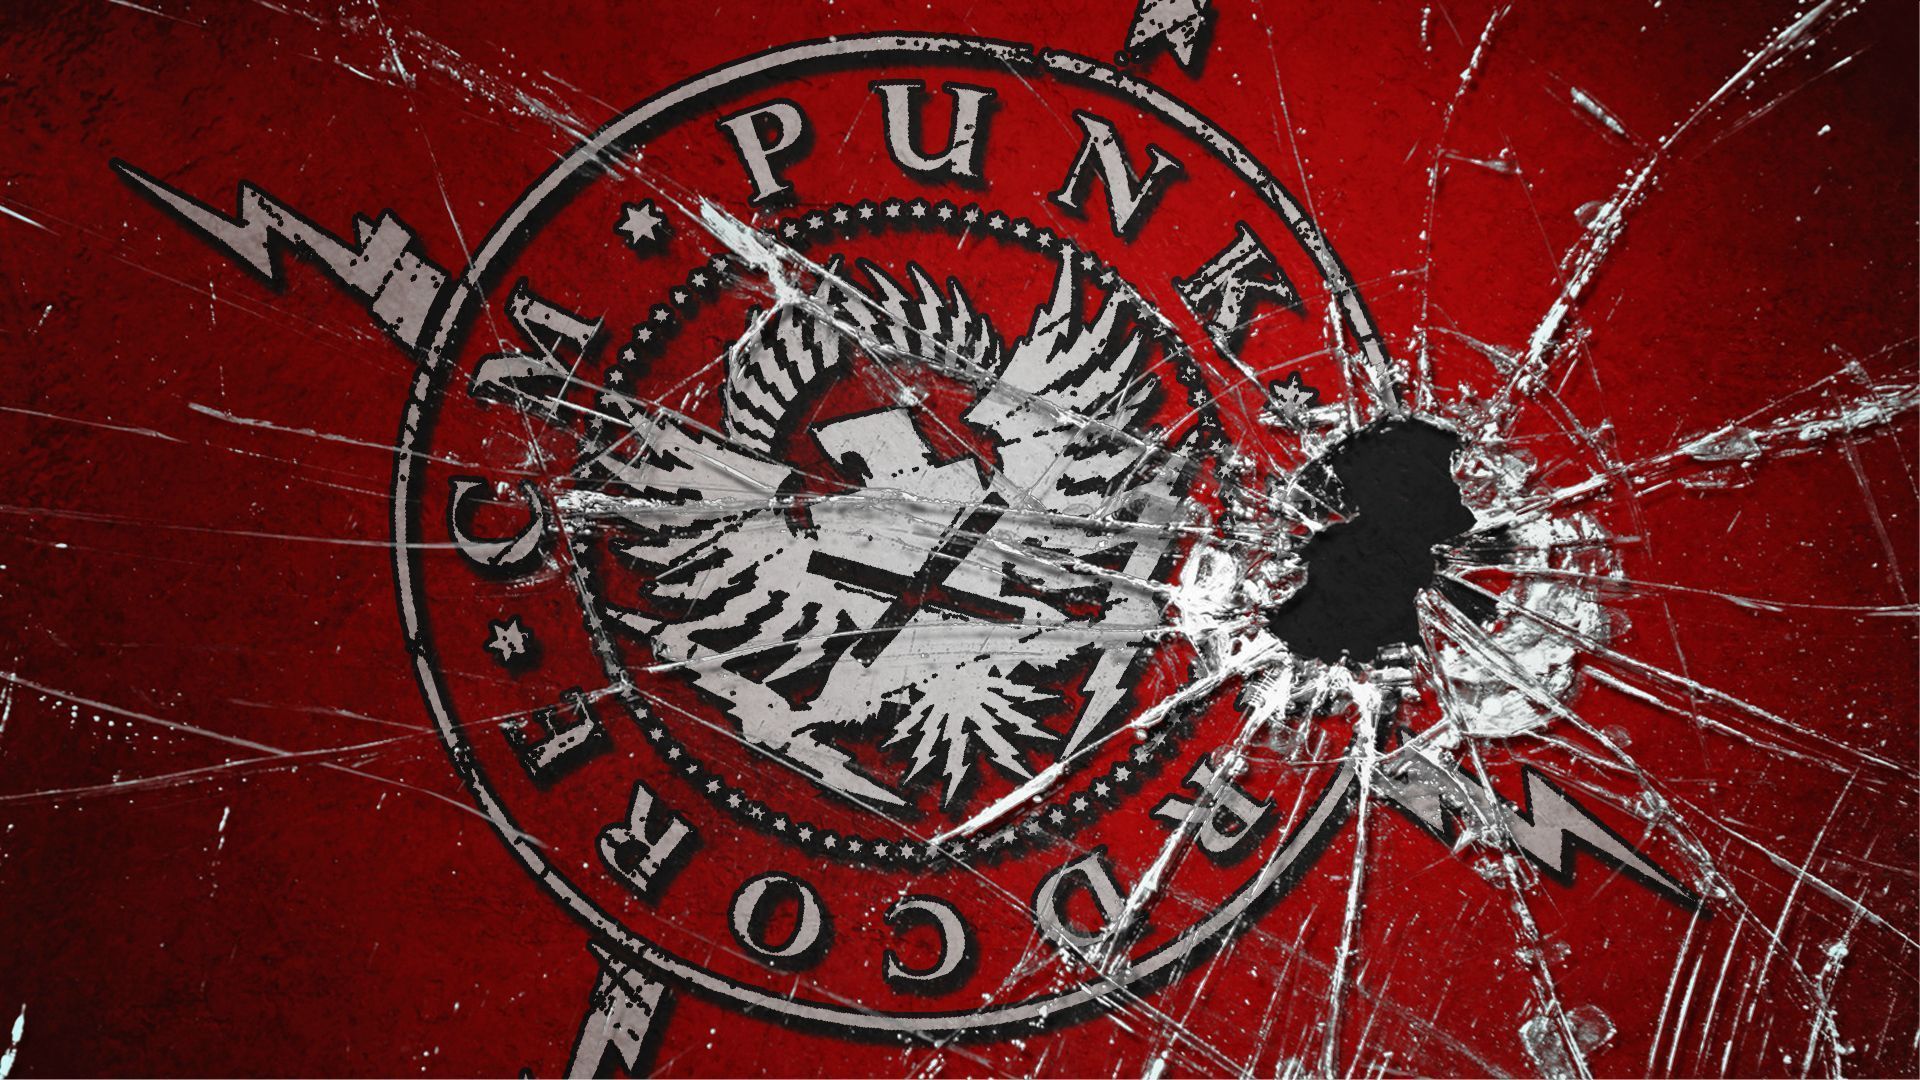 CM Punk wallpaper, wanted to share with you guys - Imgur